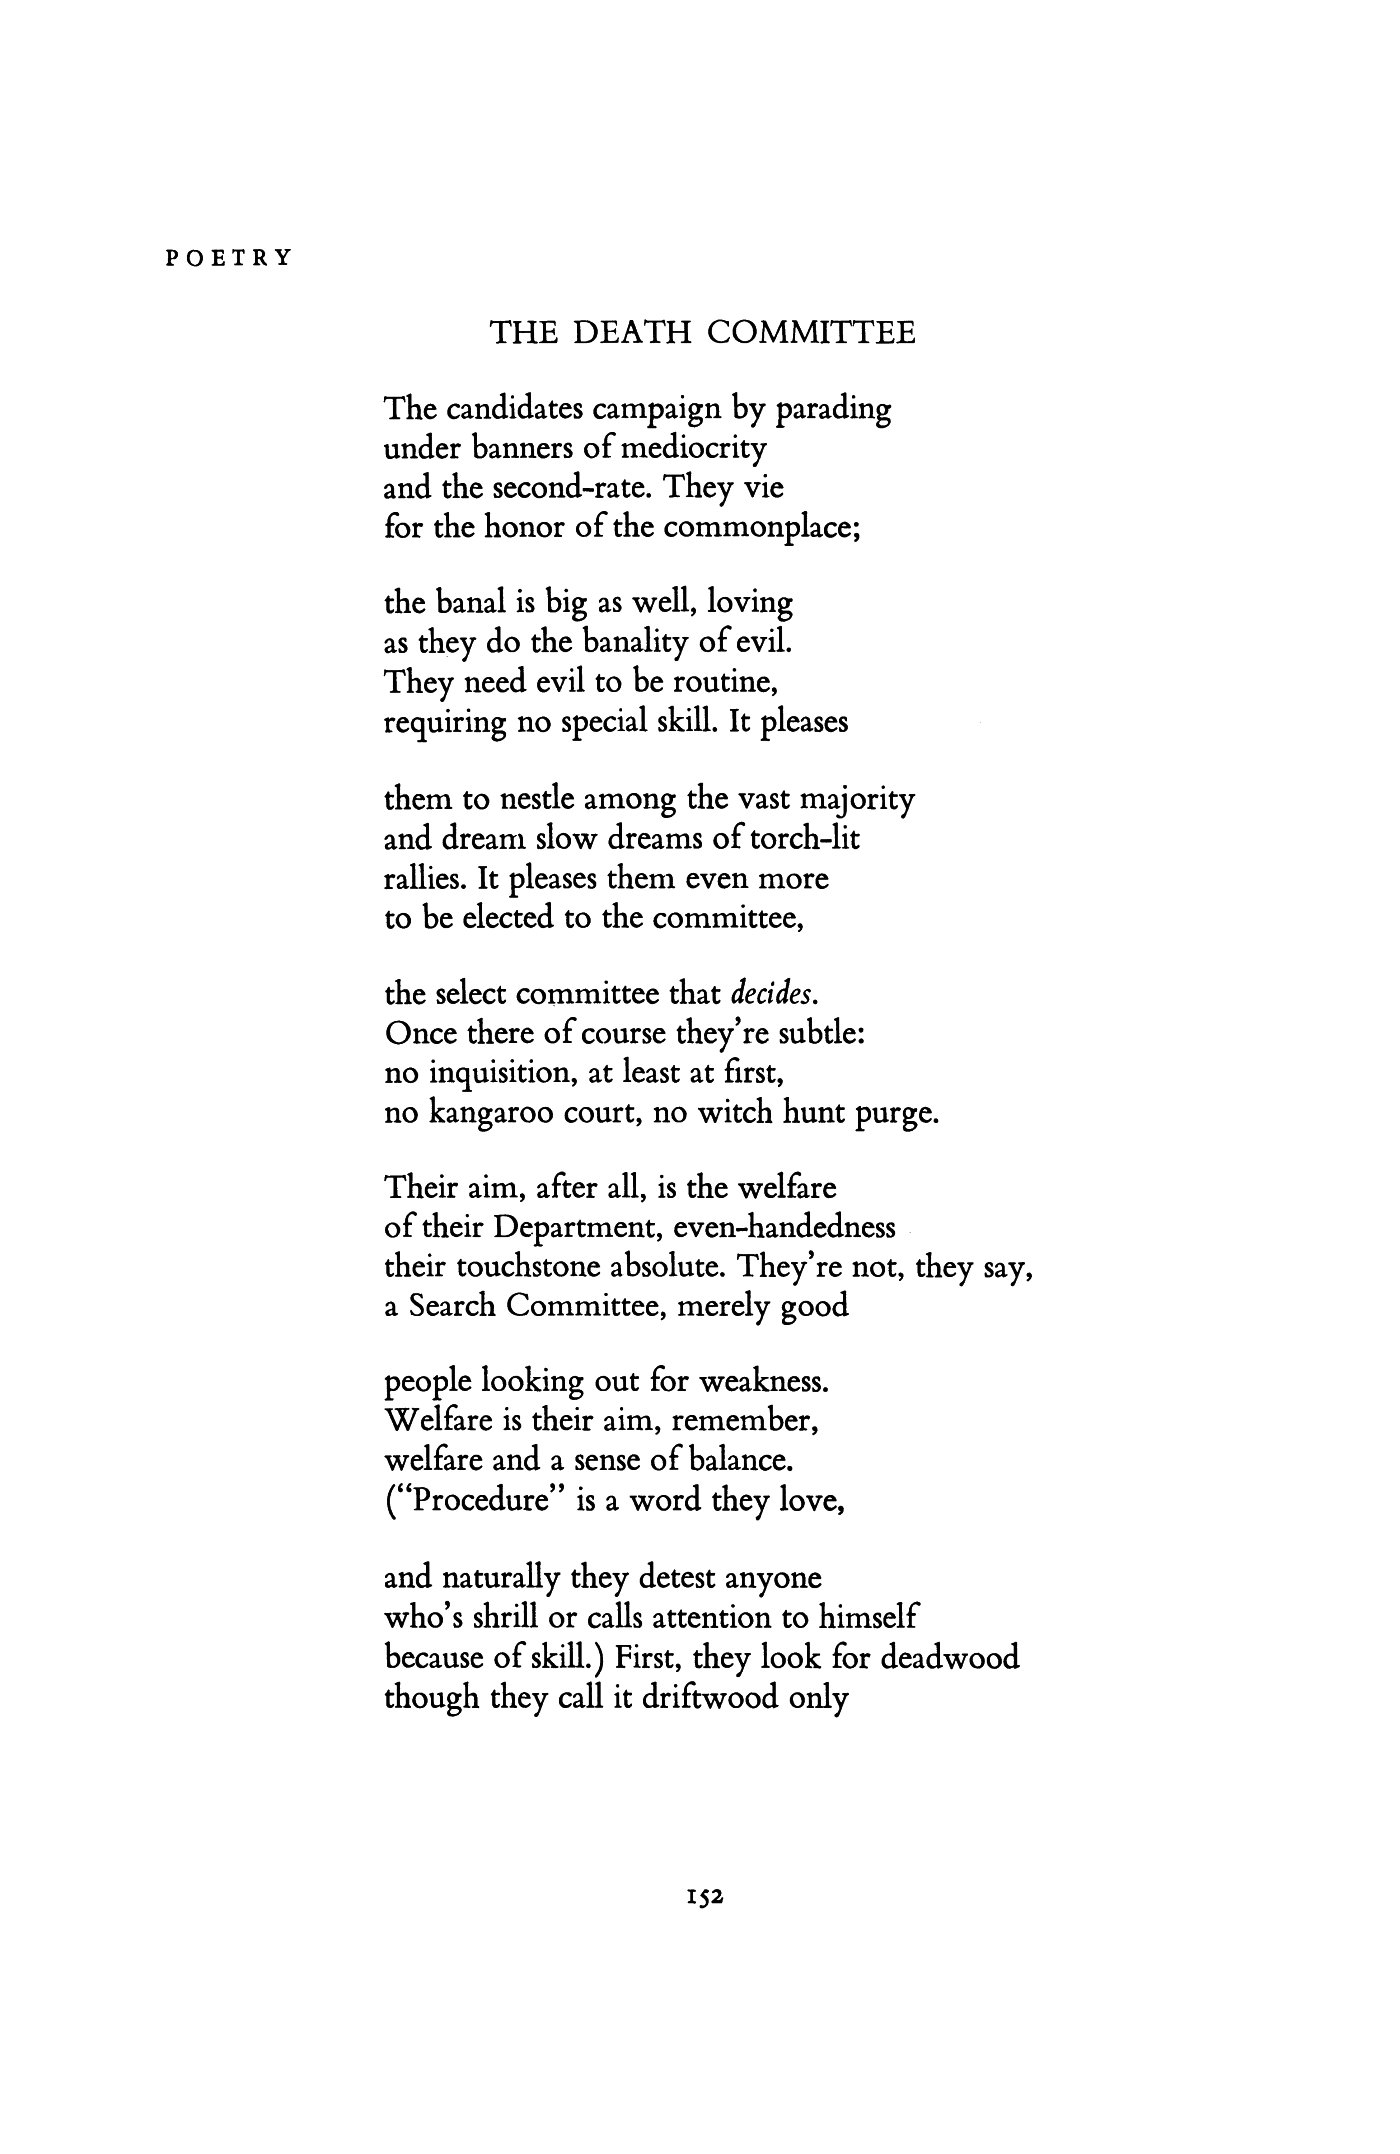 https://static.poetryfoundation.org/jstor/i20593463/pages/32.png